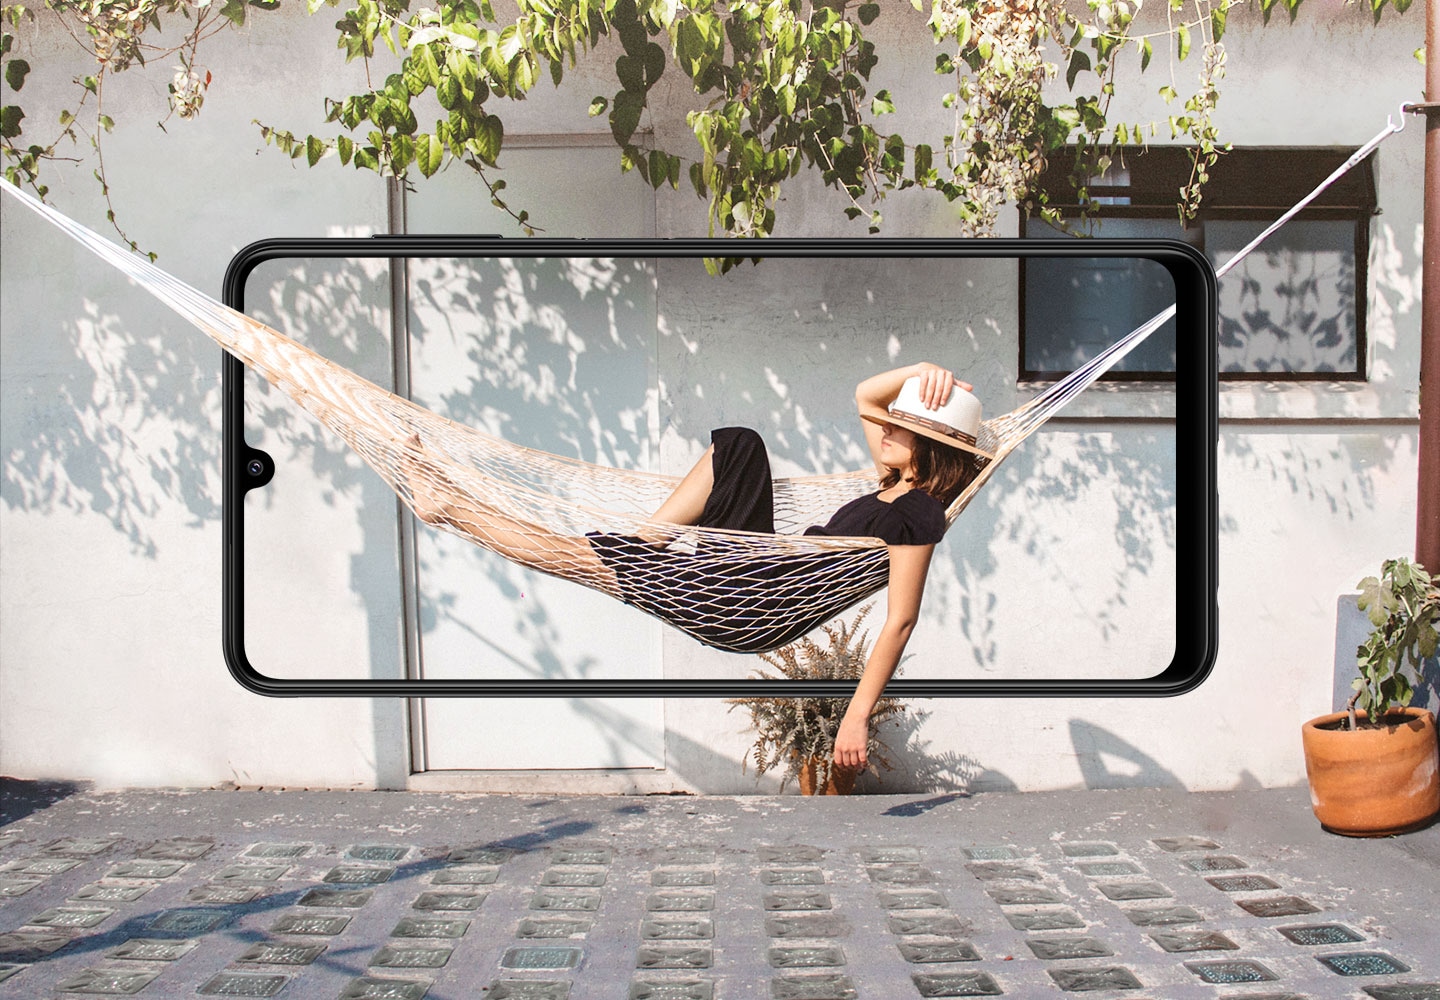 A Galaxy A22 is seen from the front, horizontally. Onscreen, a woman rests in a hammock, which blends beyond the bezel with the side of a house.